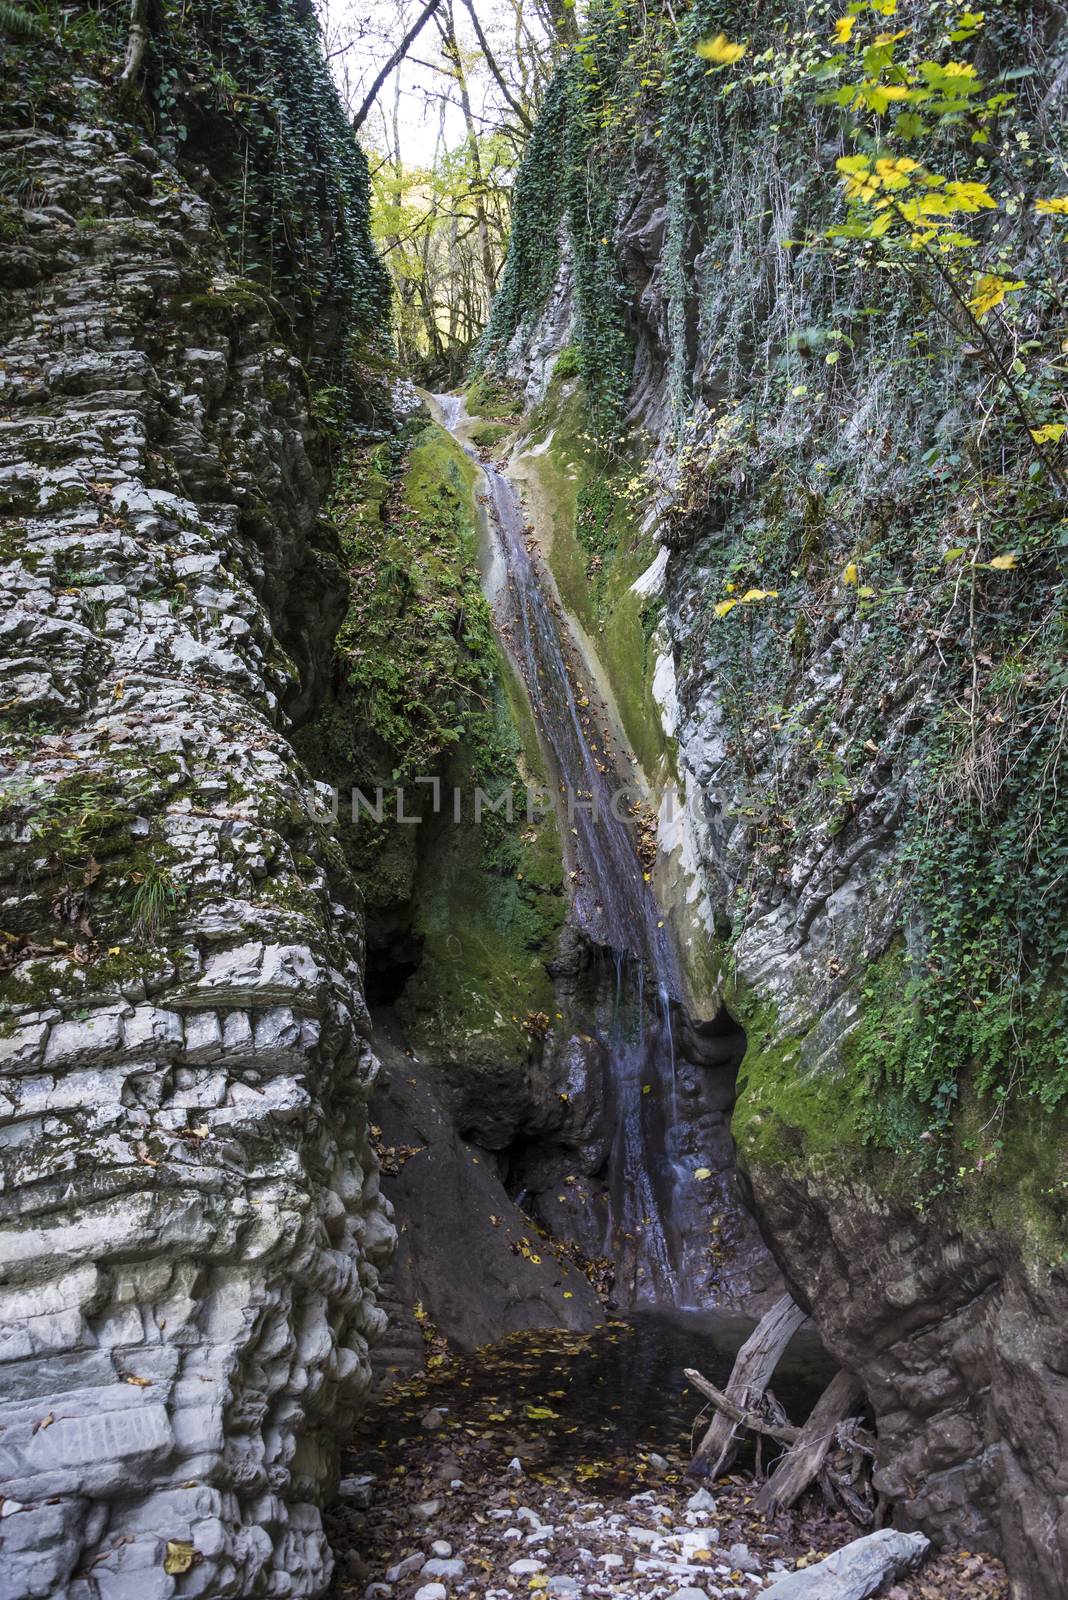 Waterfall Miracle beauty in Lazarevsky district of Sochi, Russia. 7 November 2019 by butenkow